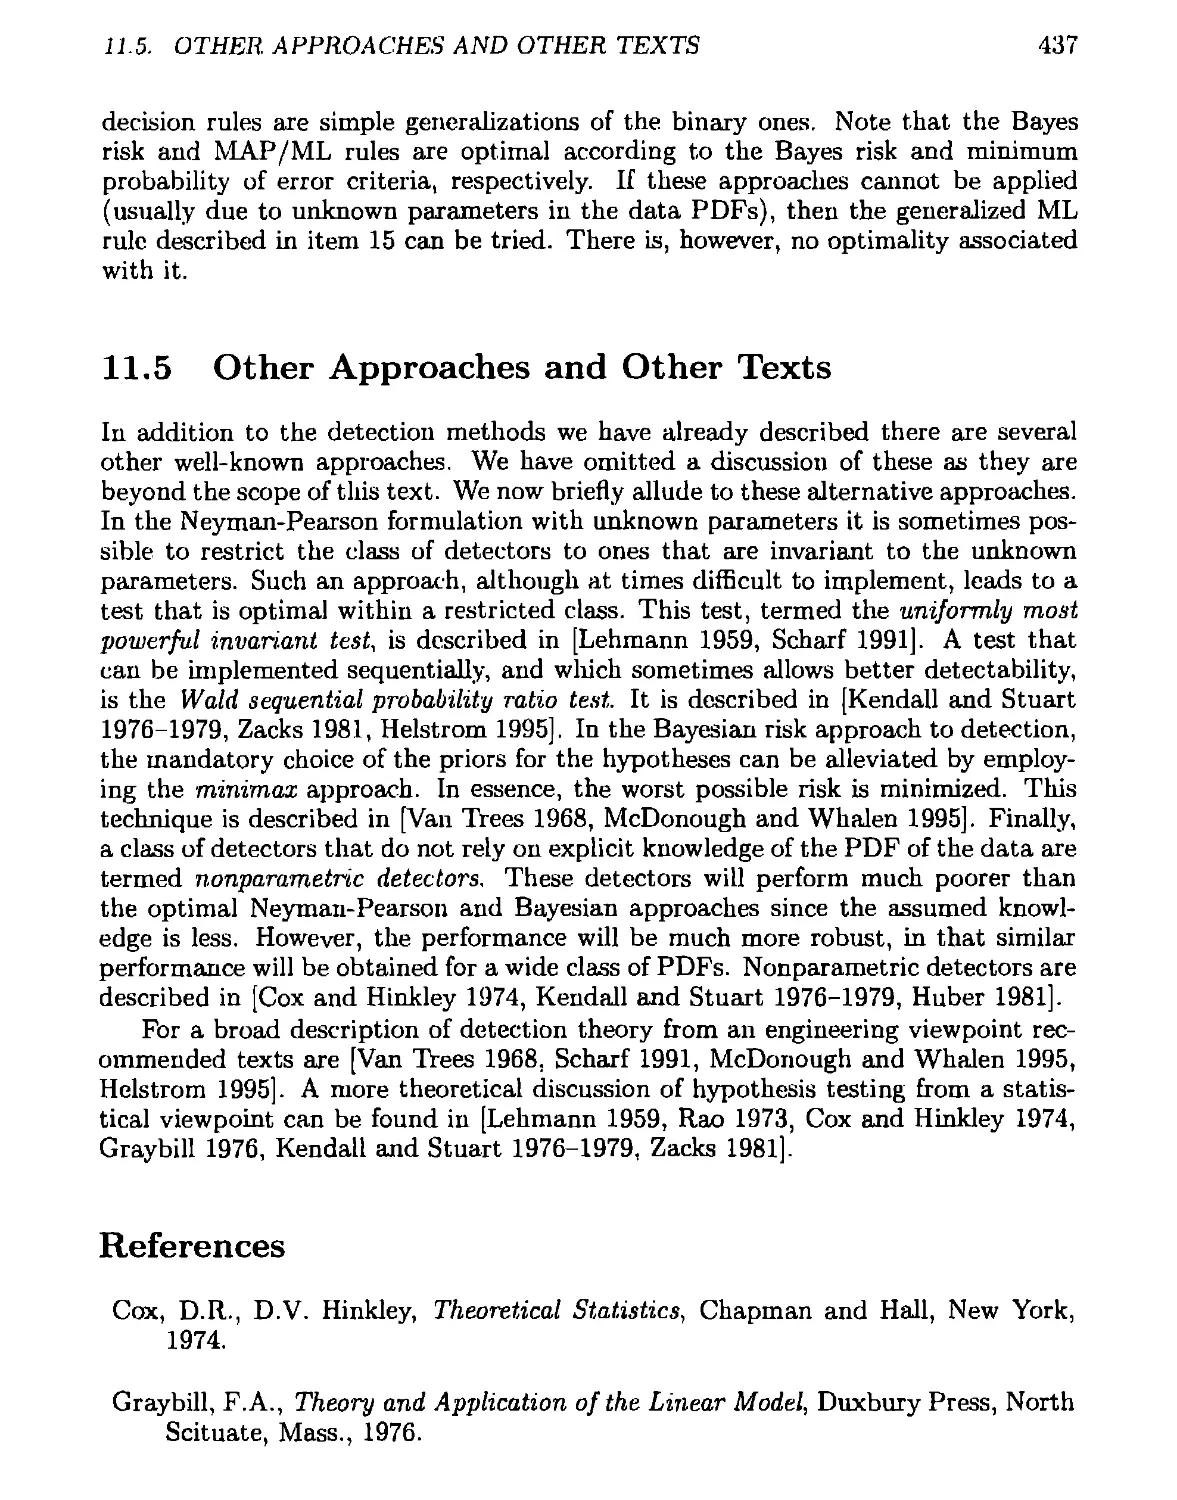 11.5 Other Approaches and Other Texts
References